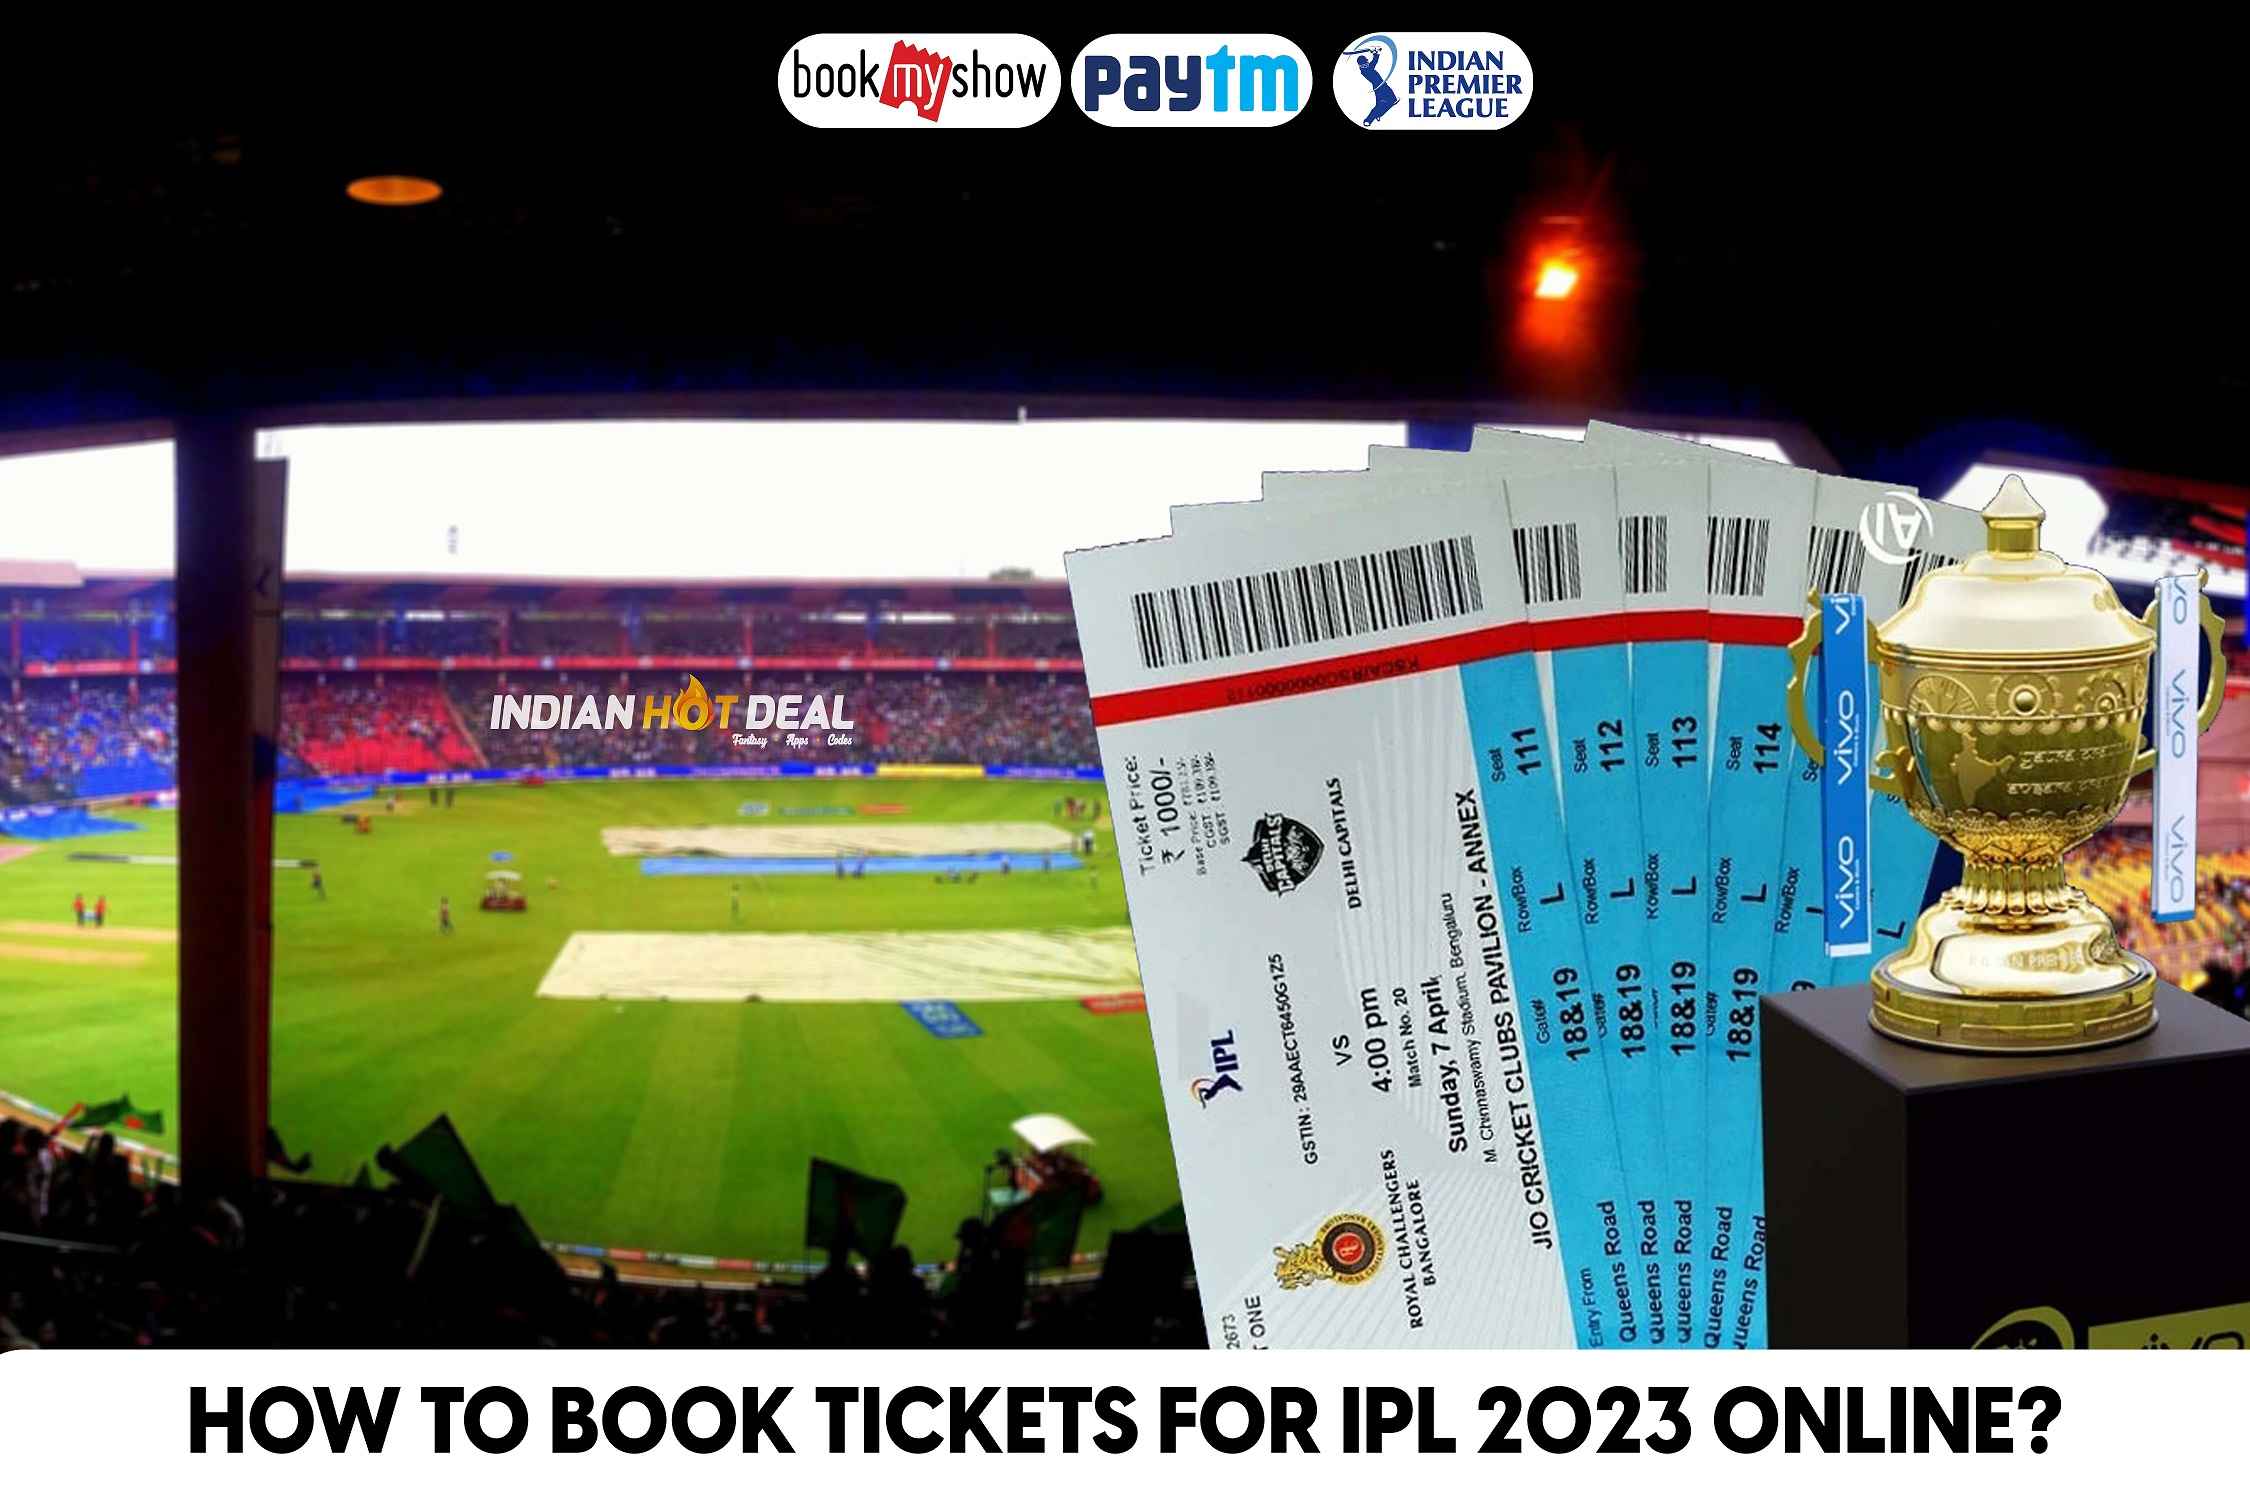 How To Book Tickets for IPL 2023 Online